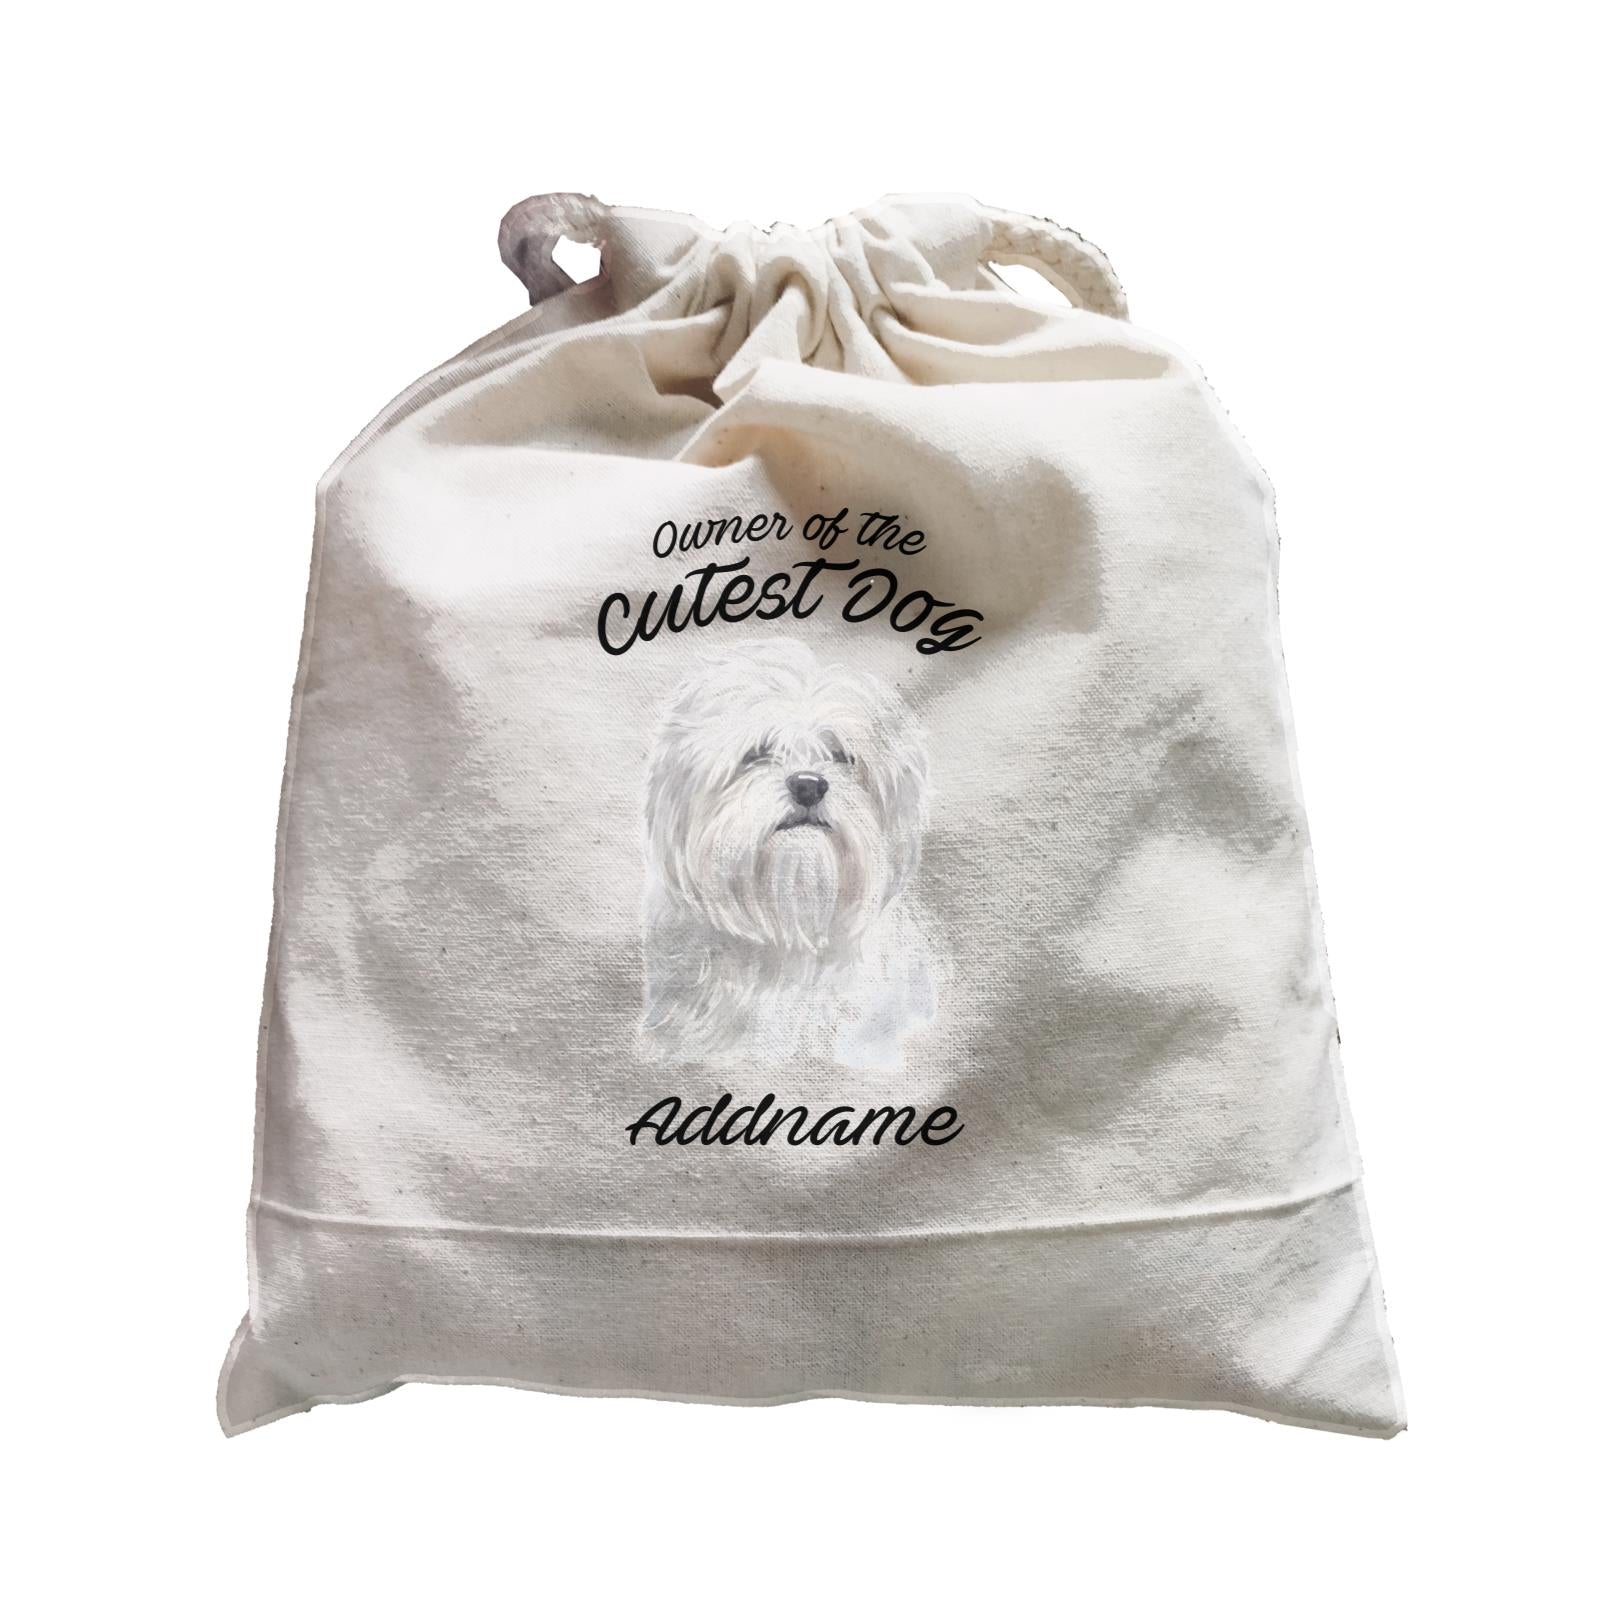 Watercolor Dog Owner Of The Cutest Dog Lhasa Apso Addname Satchel